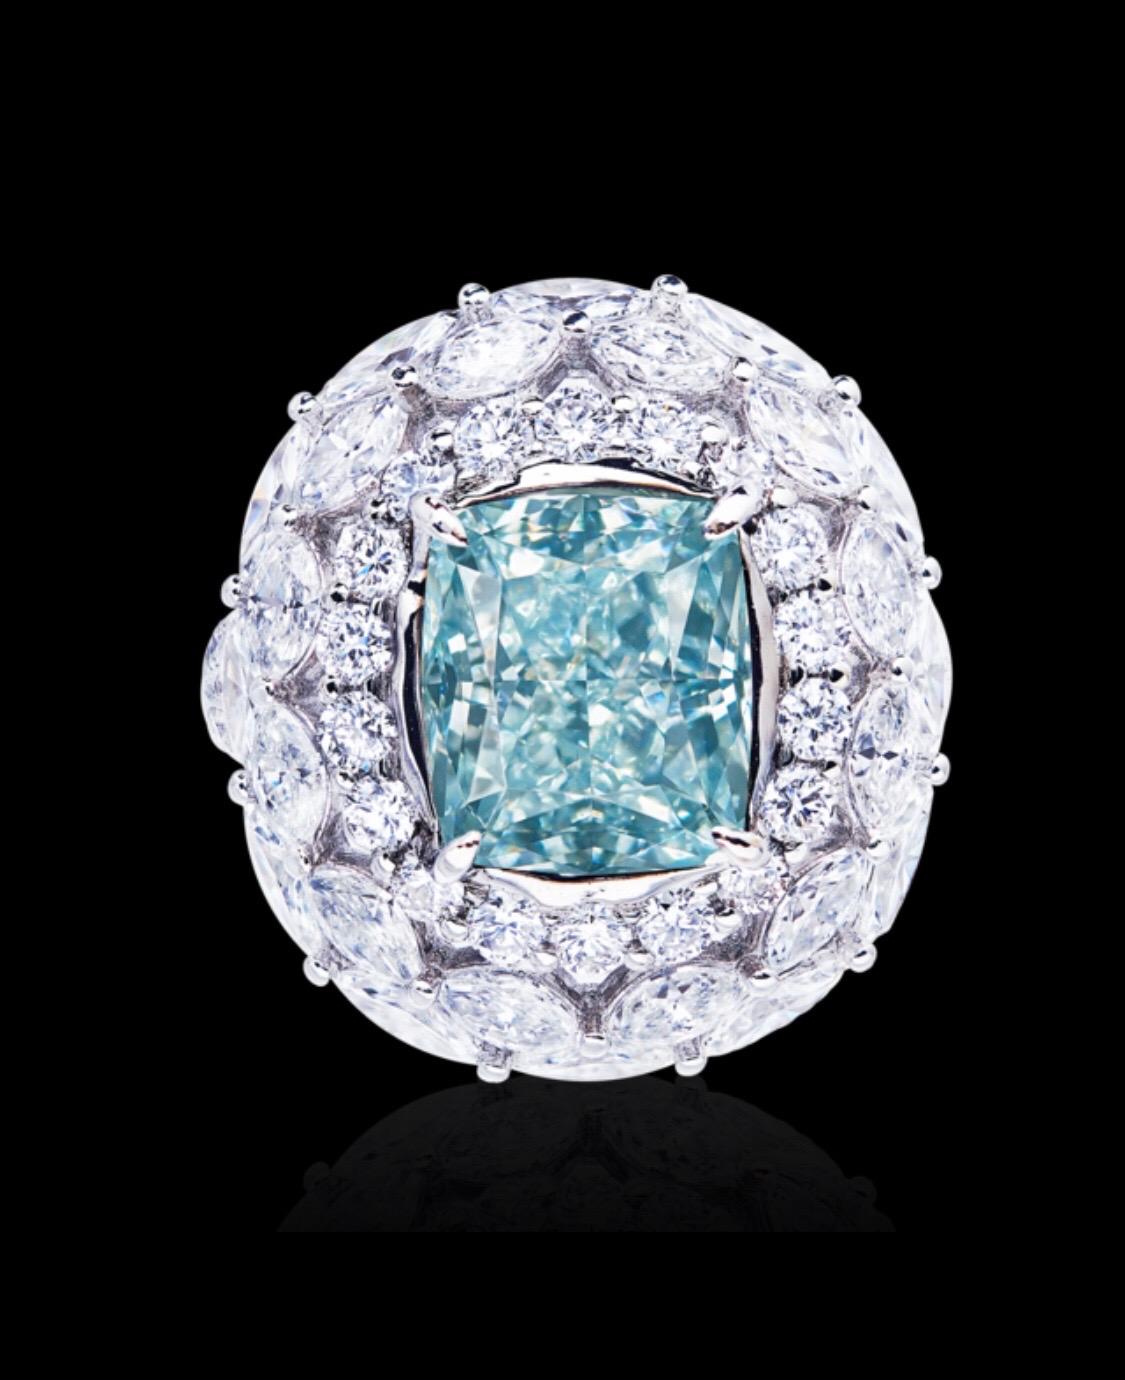 Showcasing a very special certified 5 carat clean natural fancy blue diamond ring certified by GIA. Hand made in the Emilio Jewelry Atelier, whom specializes in rare collectible pieces in the Natural ultra rare fancy colored Diamond sector.
Please